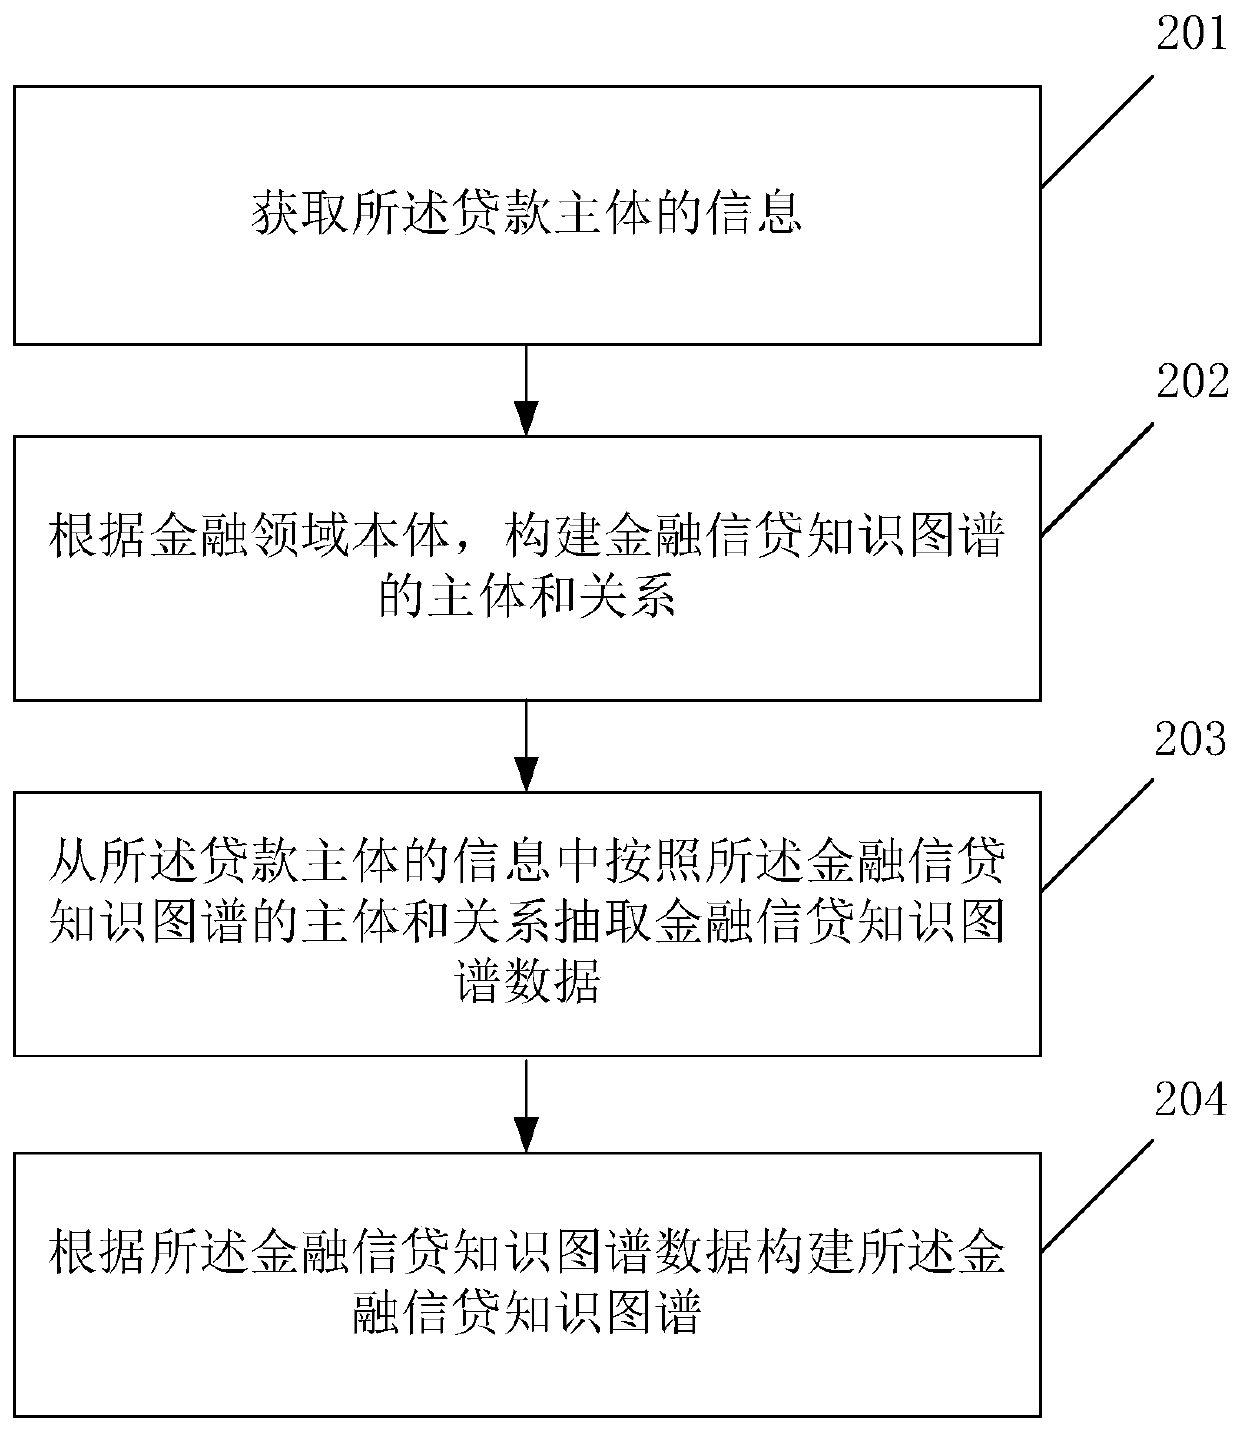 Financial credit risk identification method, model construction method and device